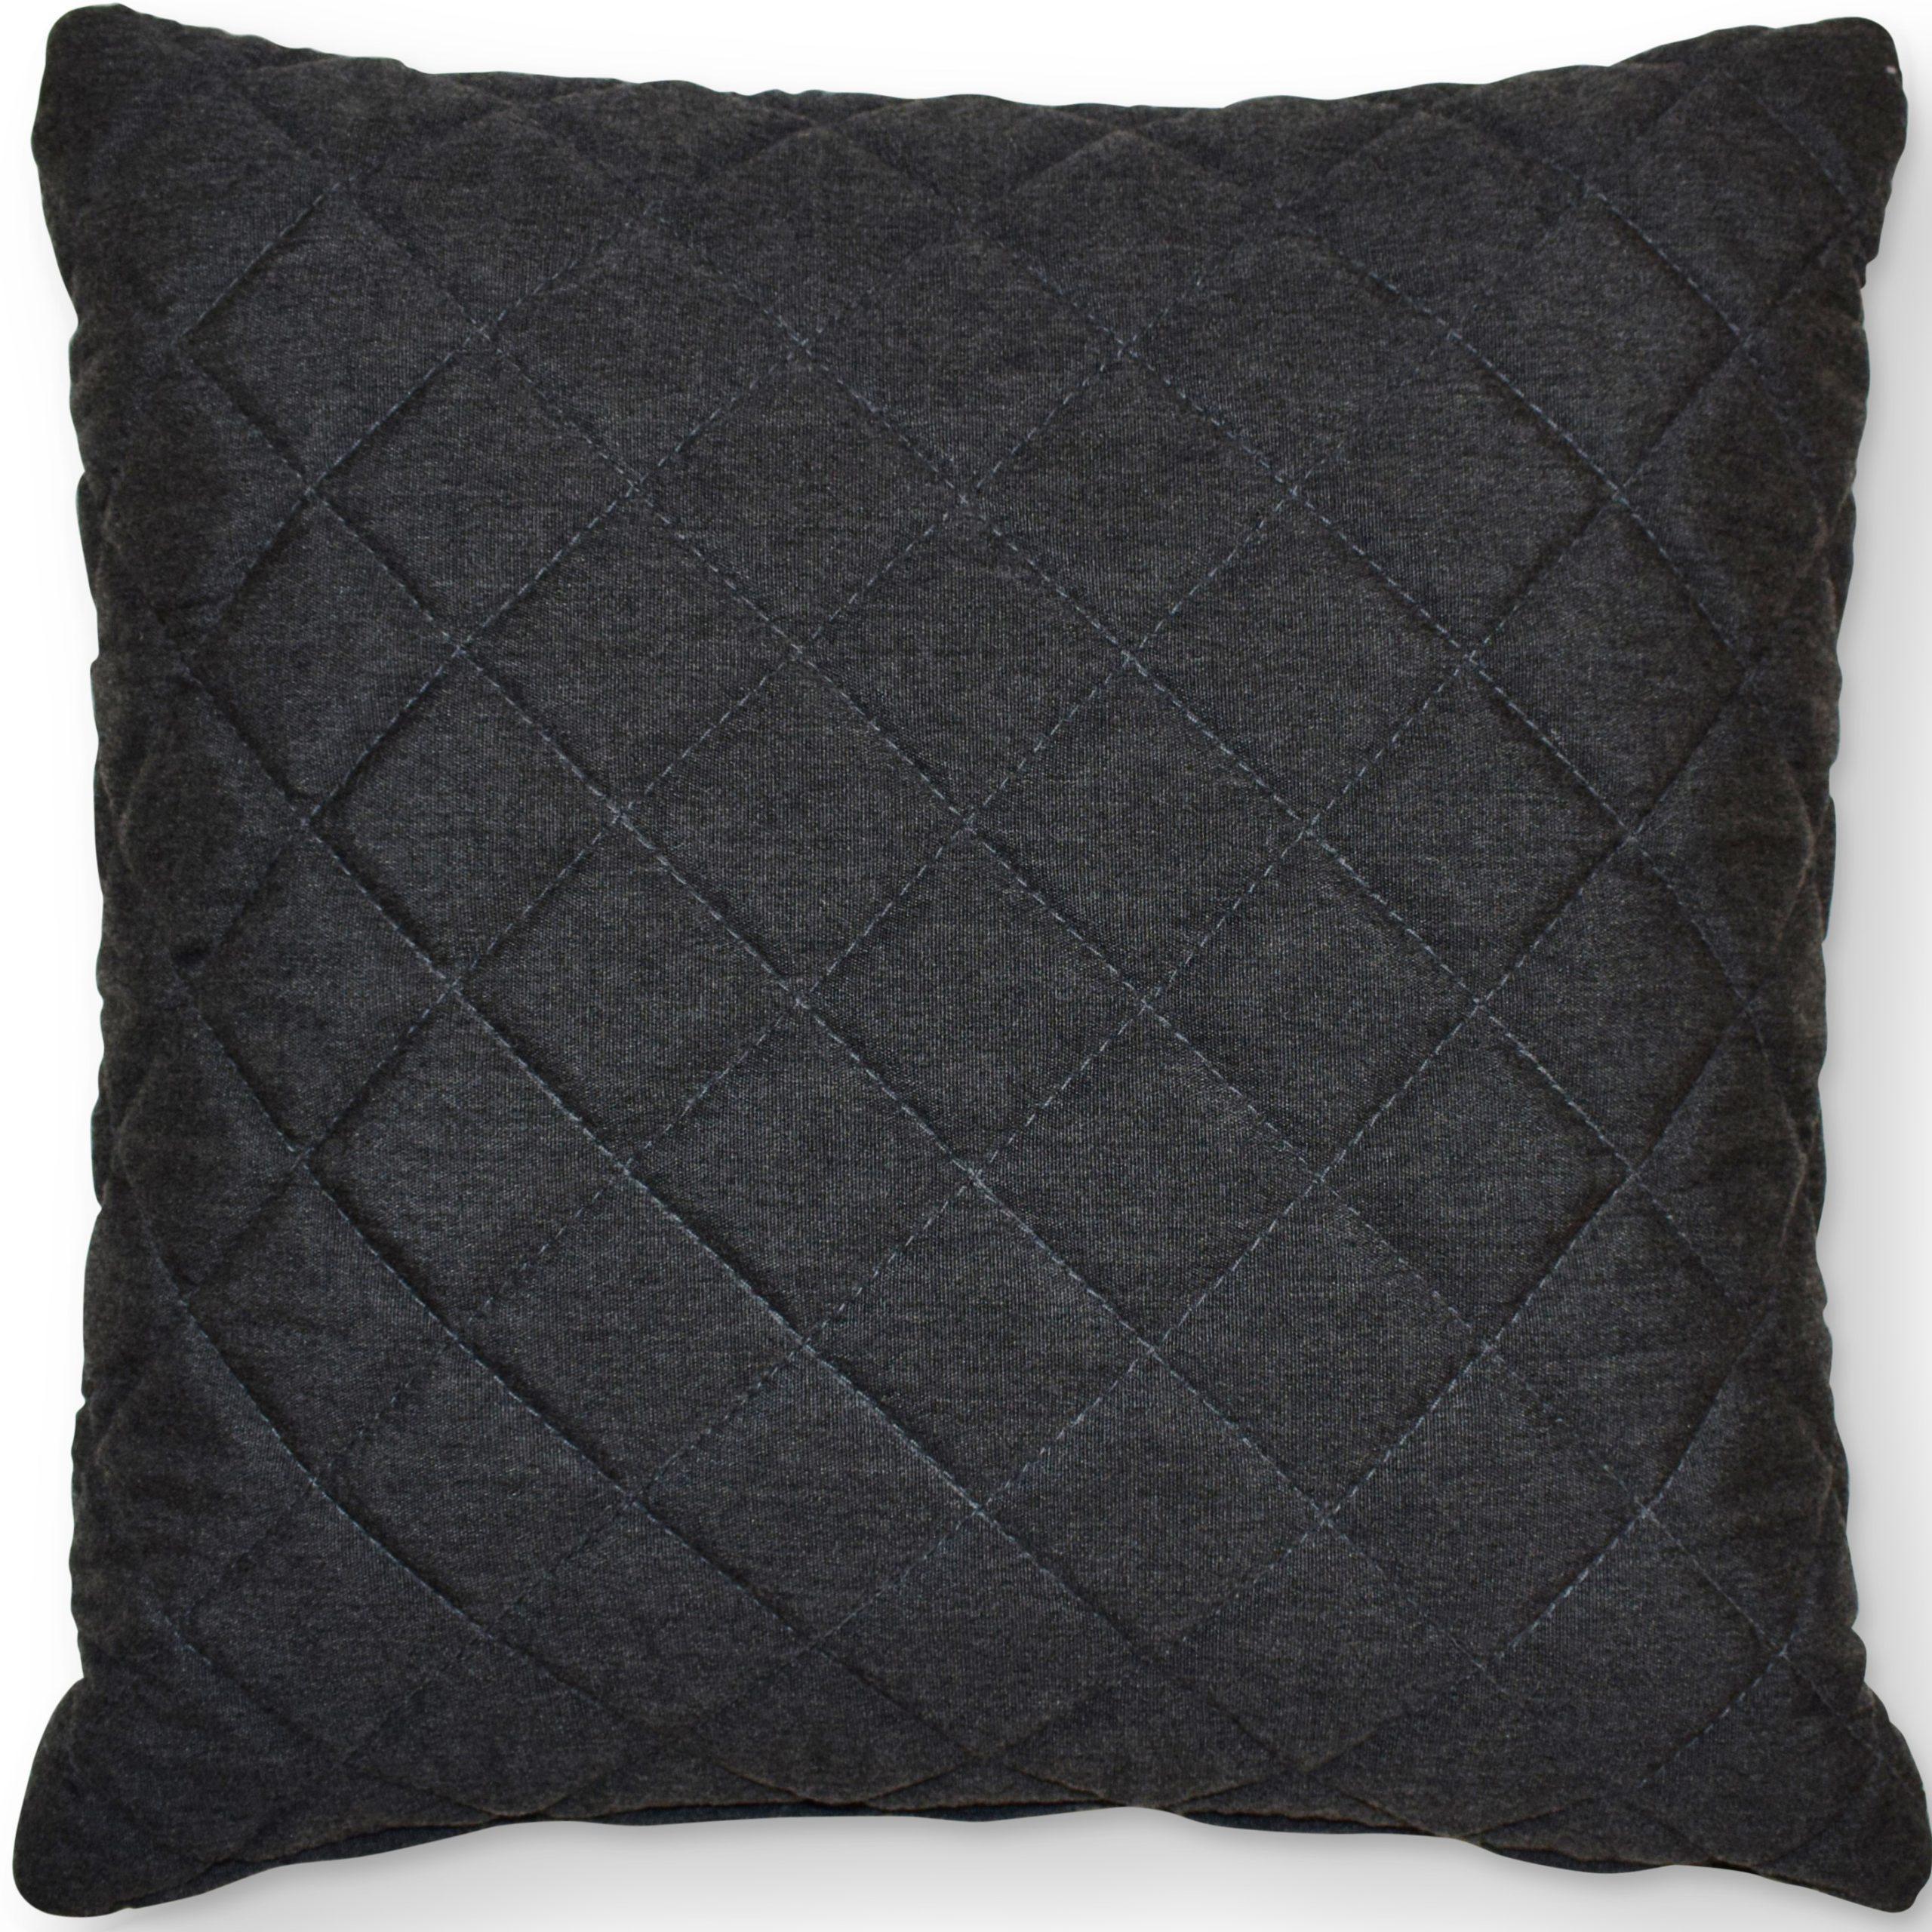 Scatter Cushion - Quilted Diamond Design - Outdoor All Weather - CHARCOAL